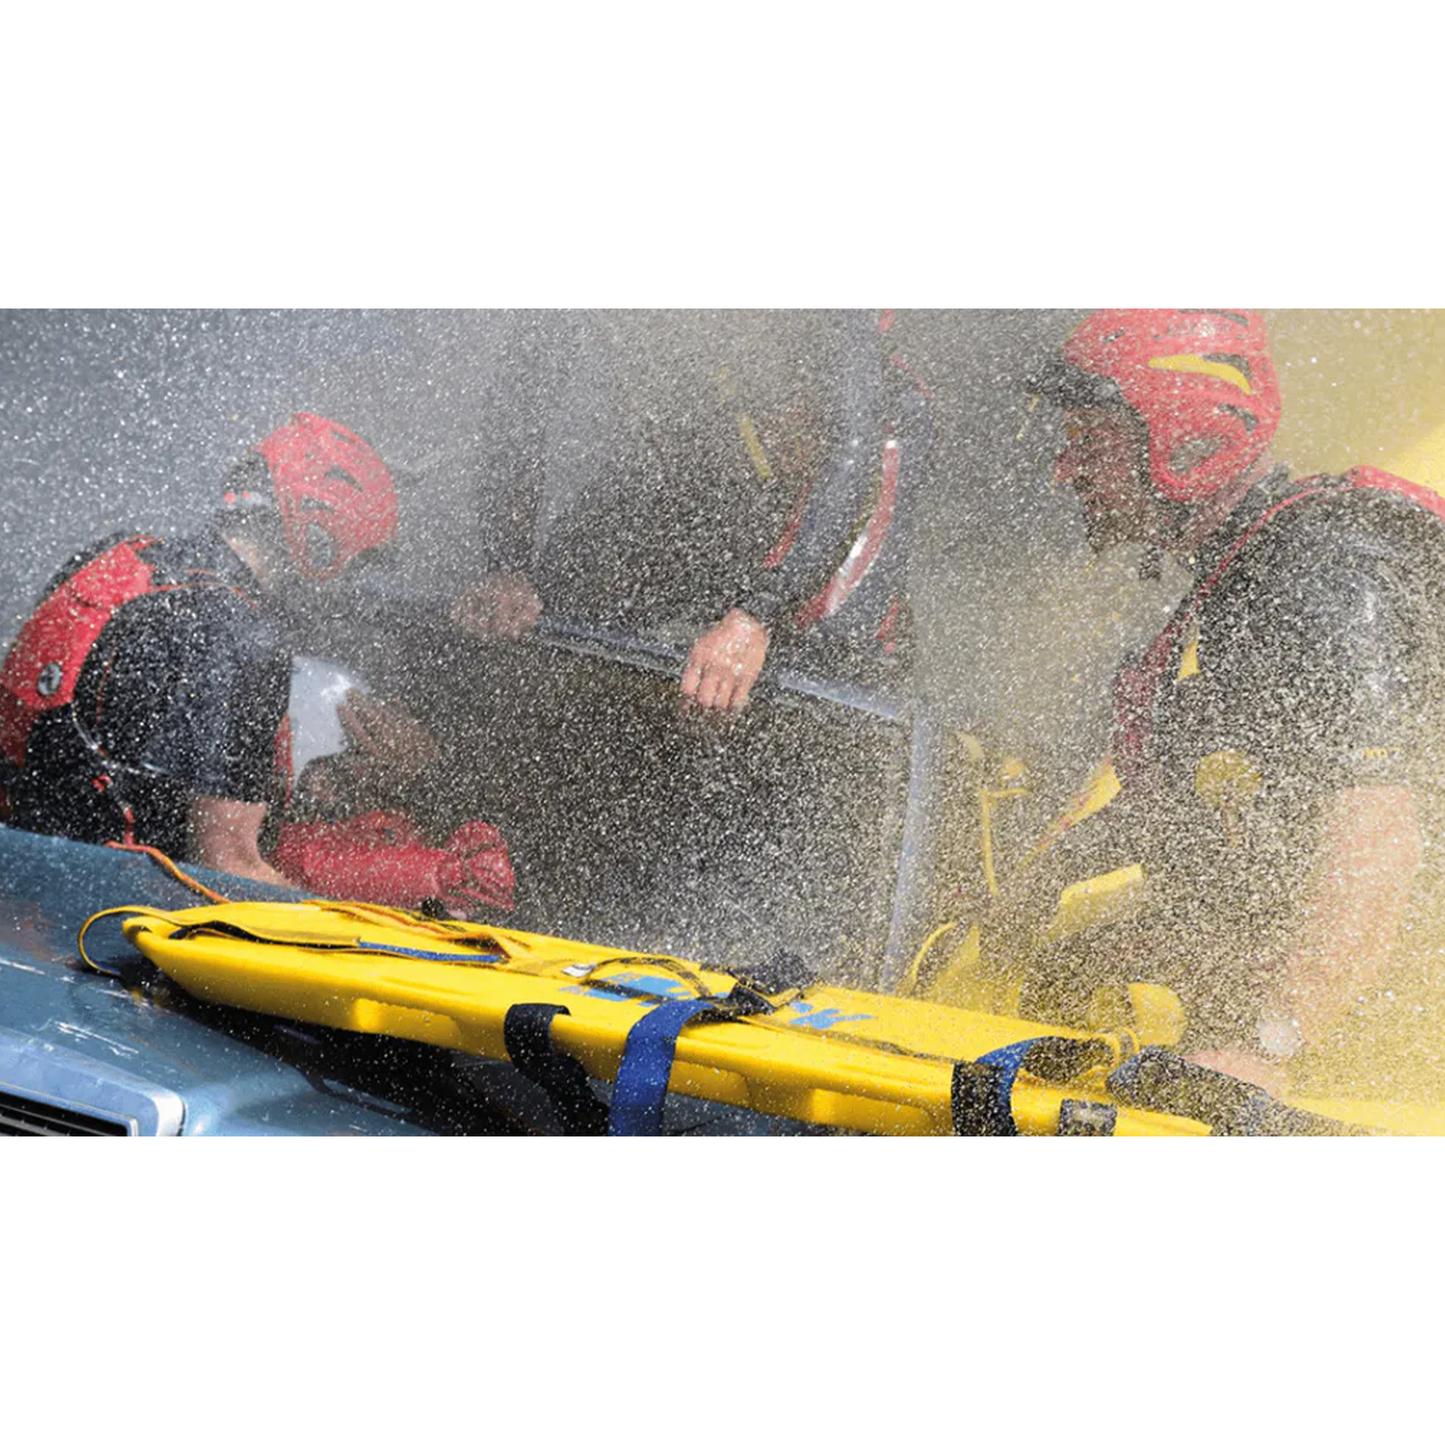 The Spencer Rock Pin Max Spinal Board - ideal for water rescue.